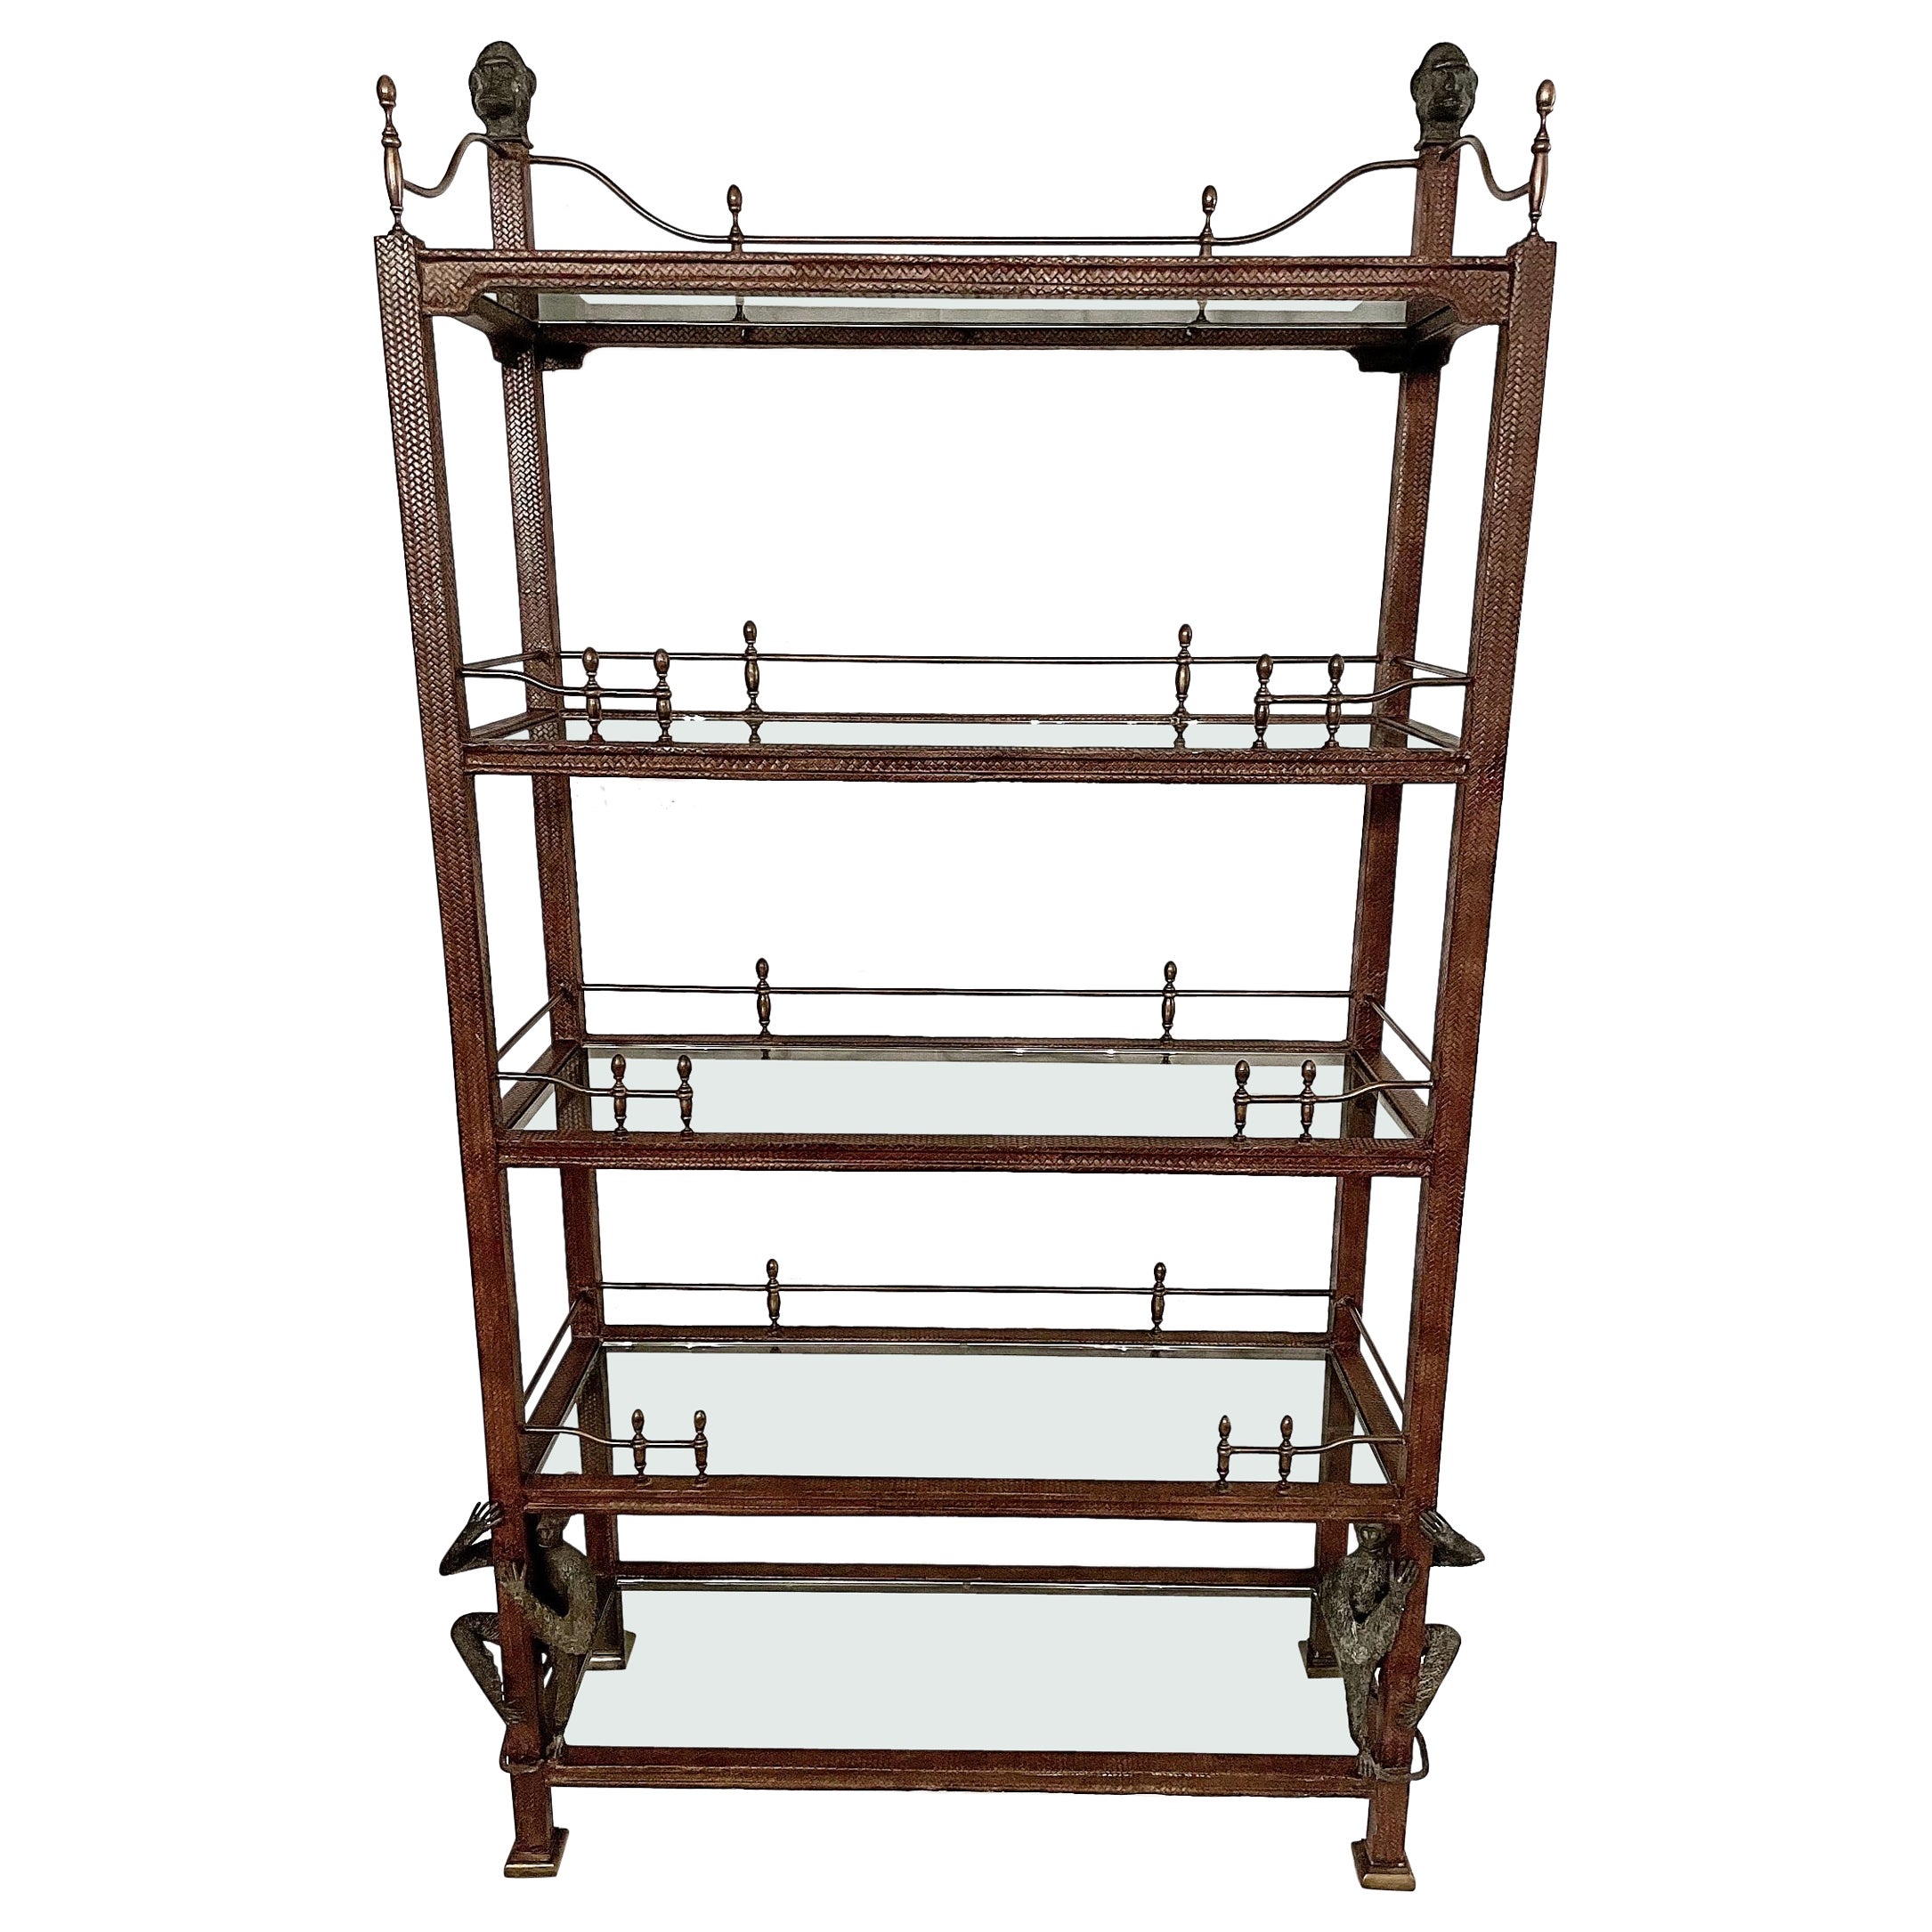 Maitland - Smith Regency Bookcase 5 Shelf Etagere Leather With Brass Rails Finia For Sale